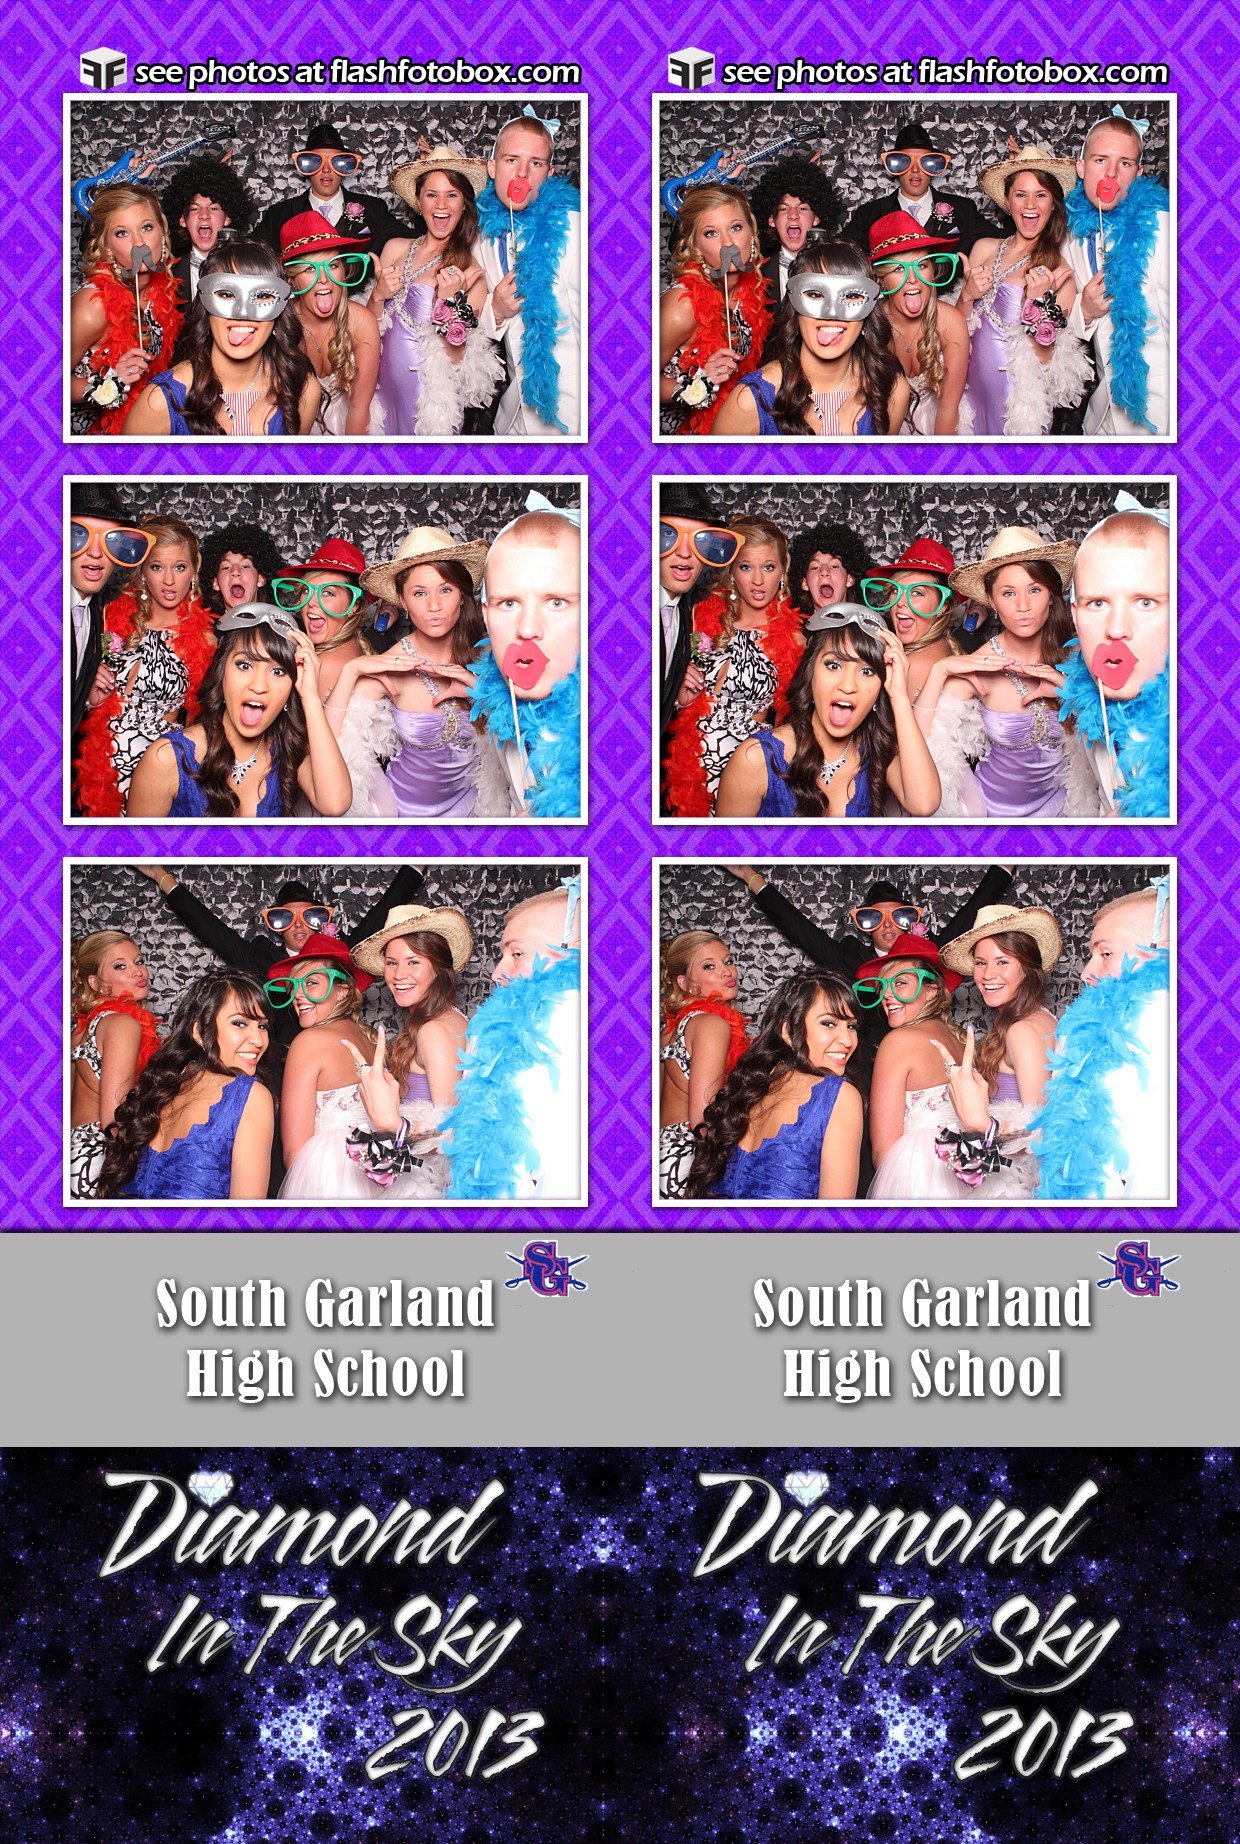 South Garland HS Prom 2013 – May 4, 2013